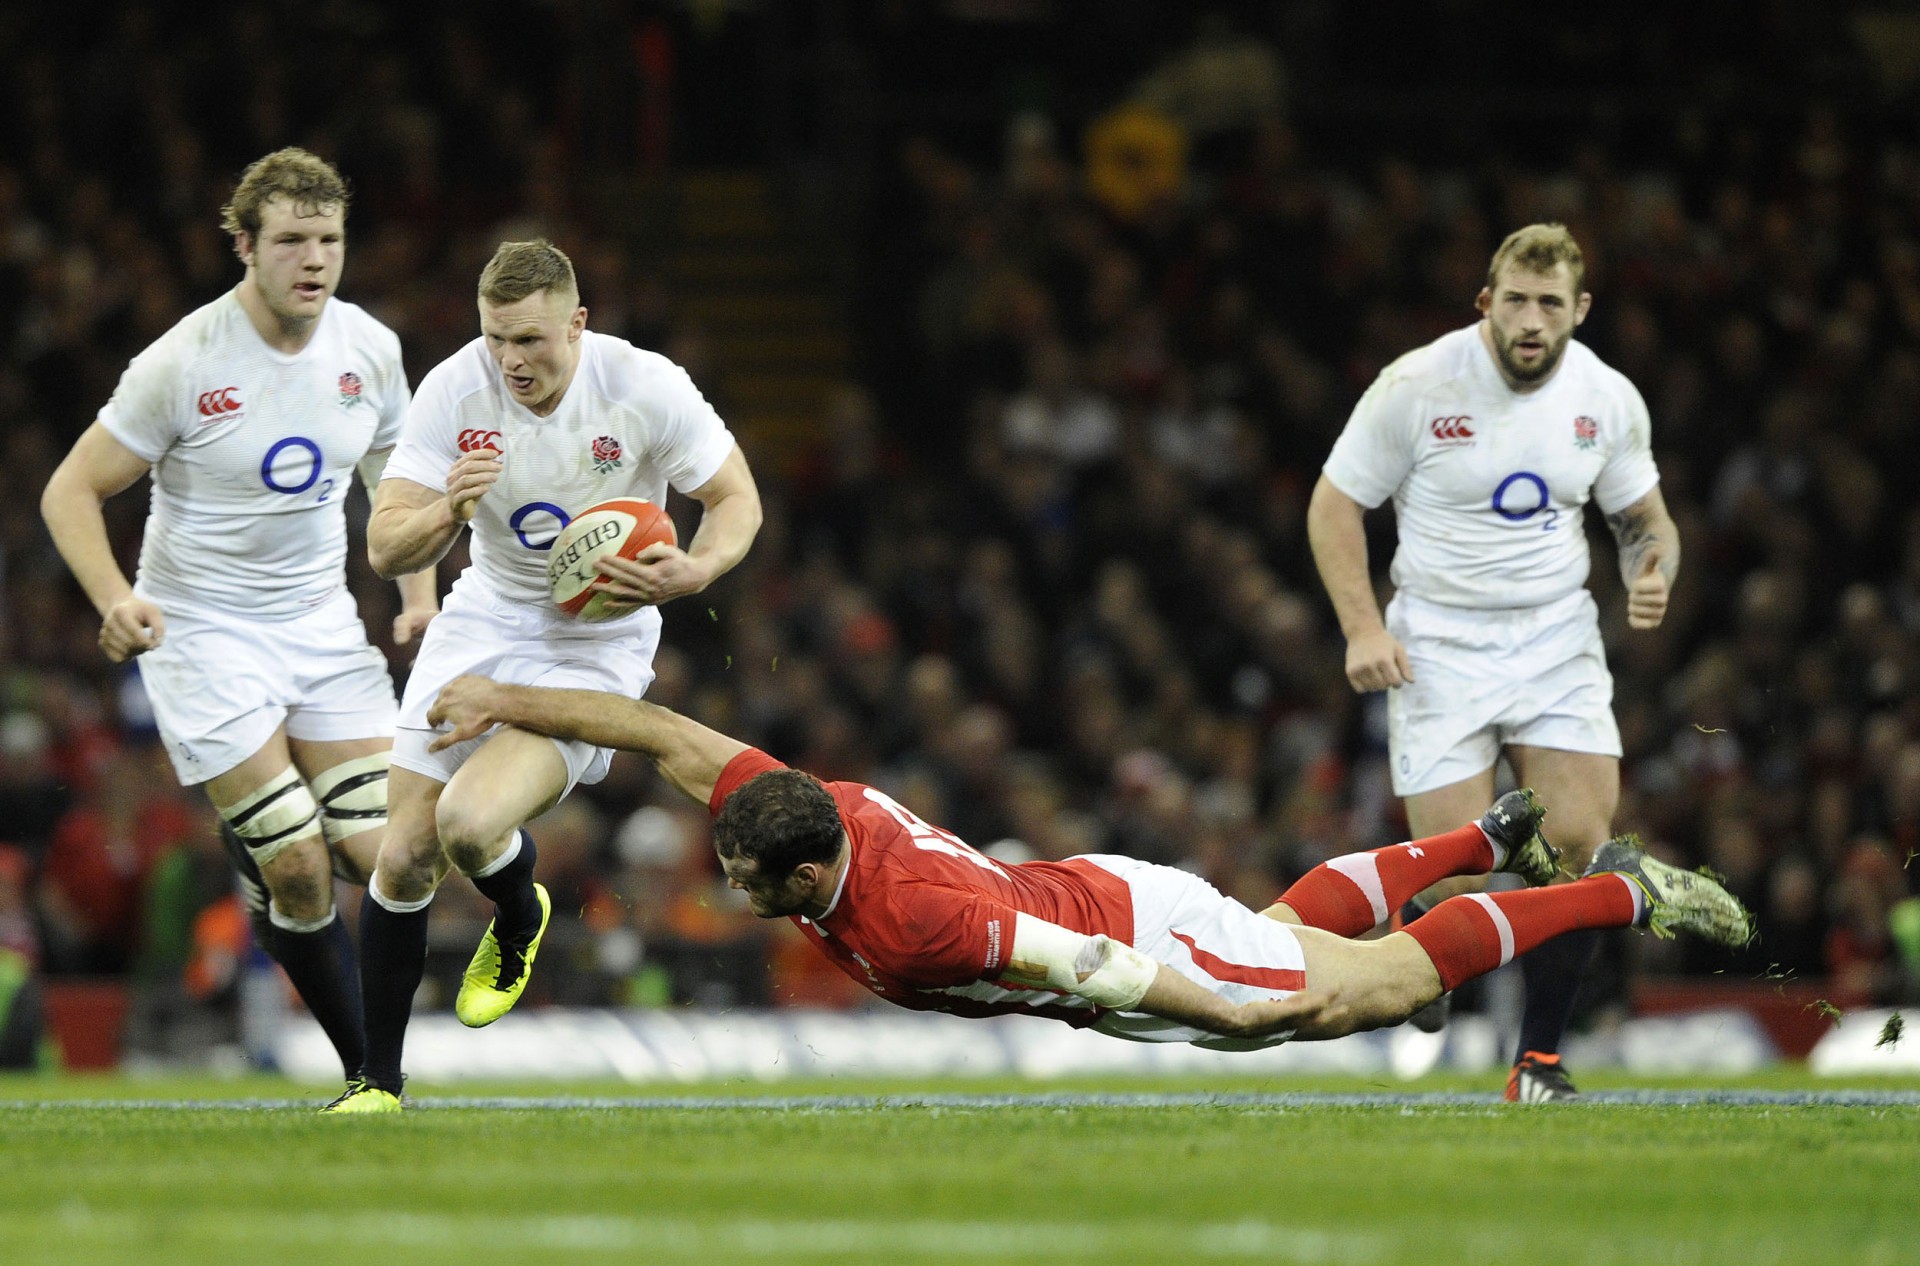 England's Ashton is tackled Wales' Roberts during their Six Nations international rugby union match at the Millennium Stadium in Cardiff